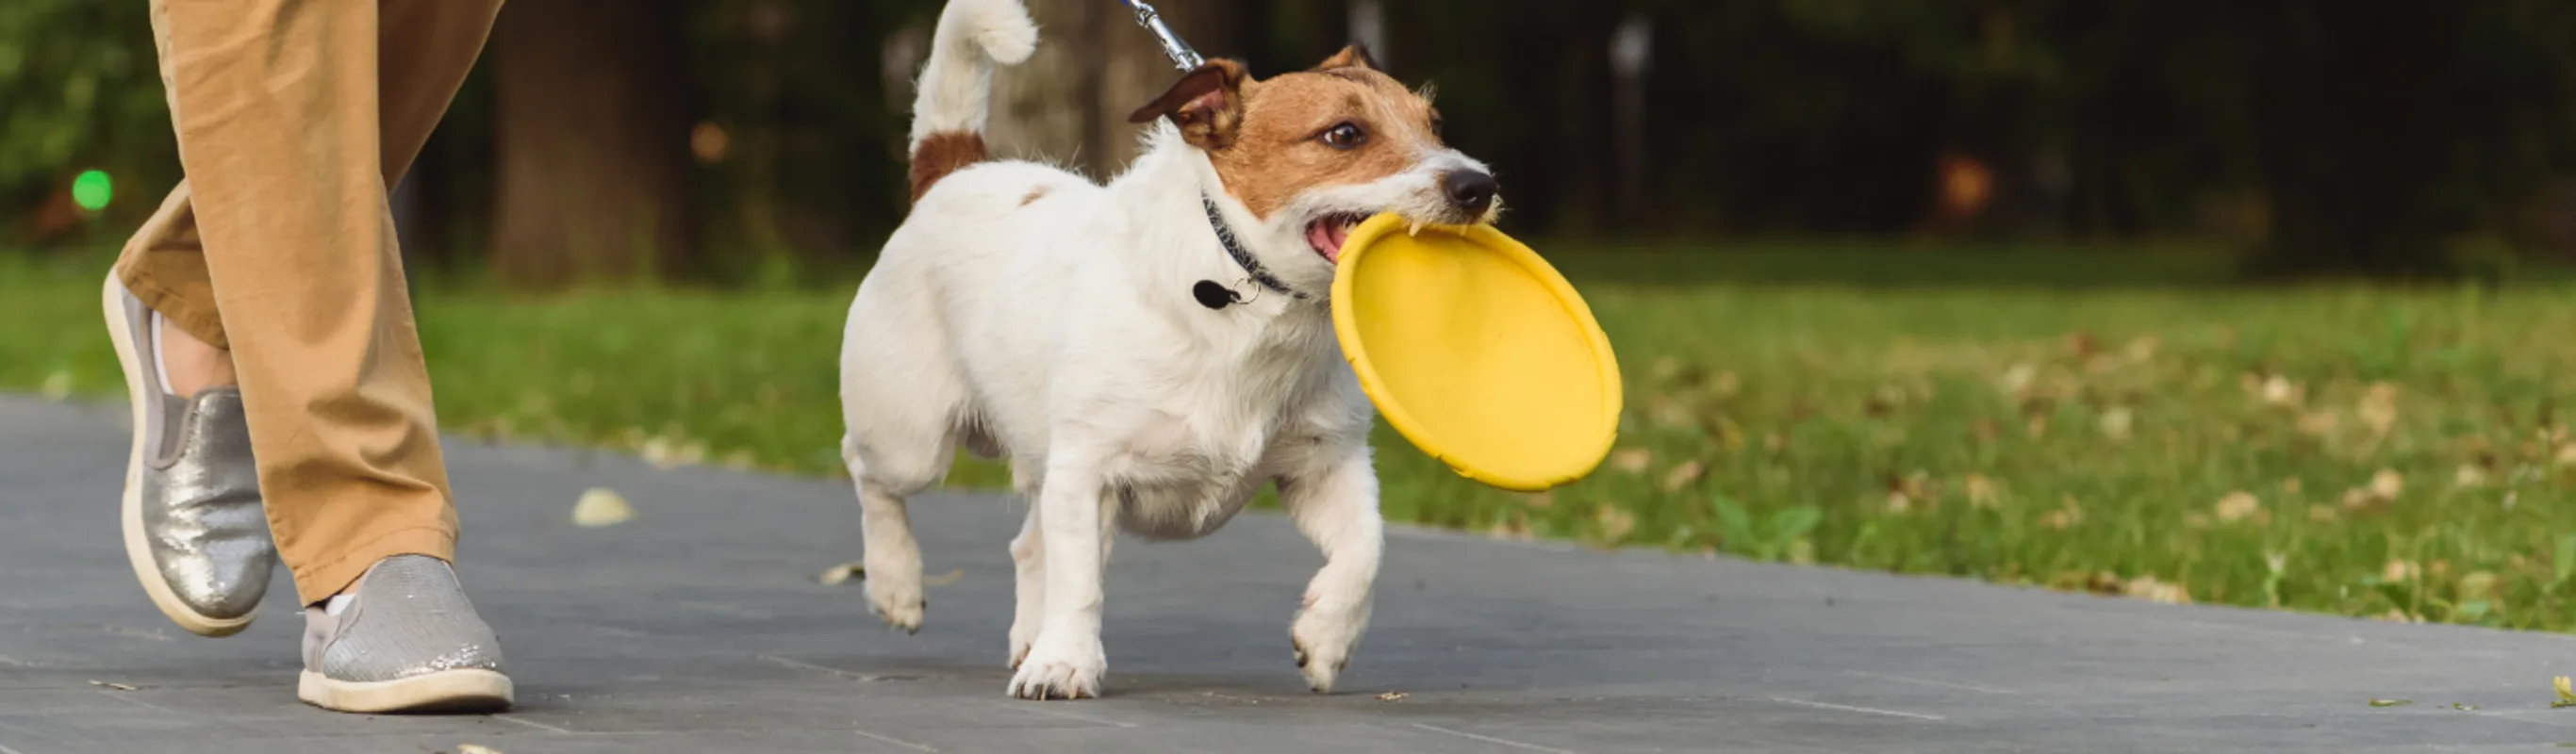 Dog Holding Frisbee Walking with Owner Outside